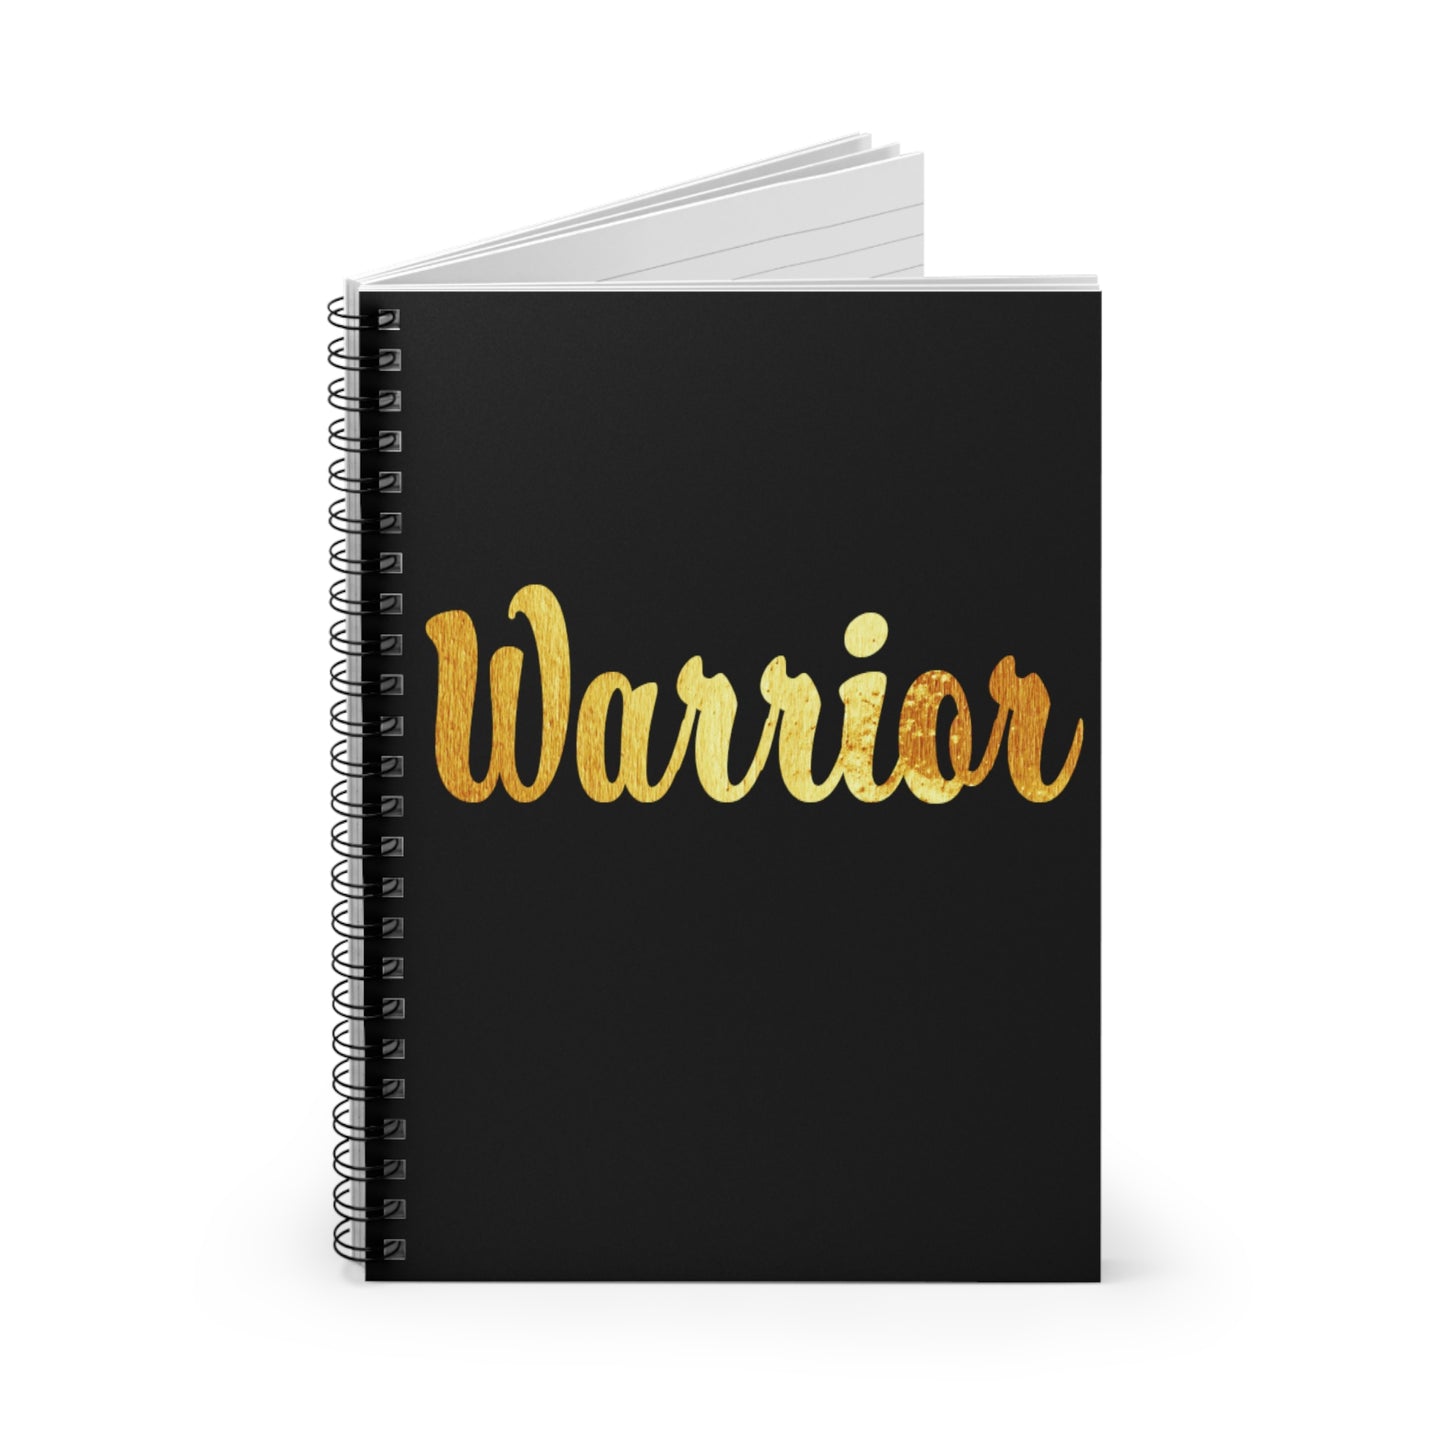 Gold and Bold Warrior - Spiral Notebook - Ruled Line